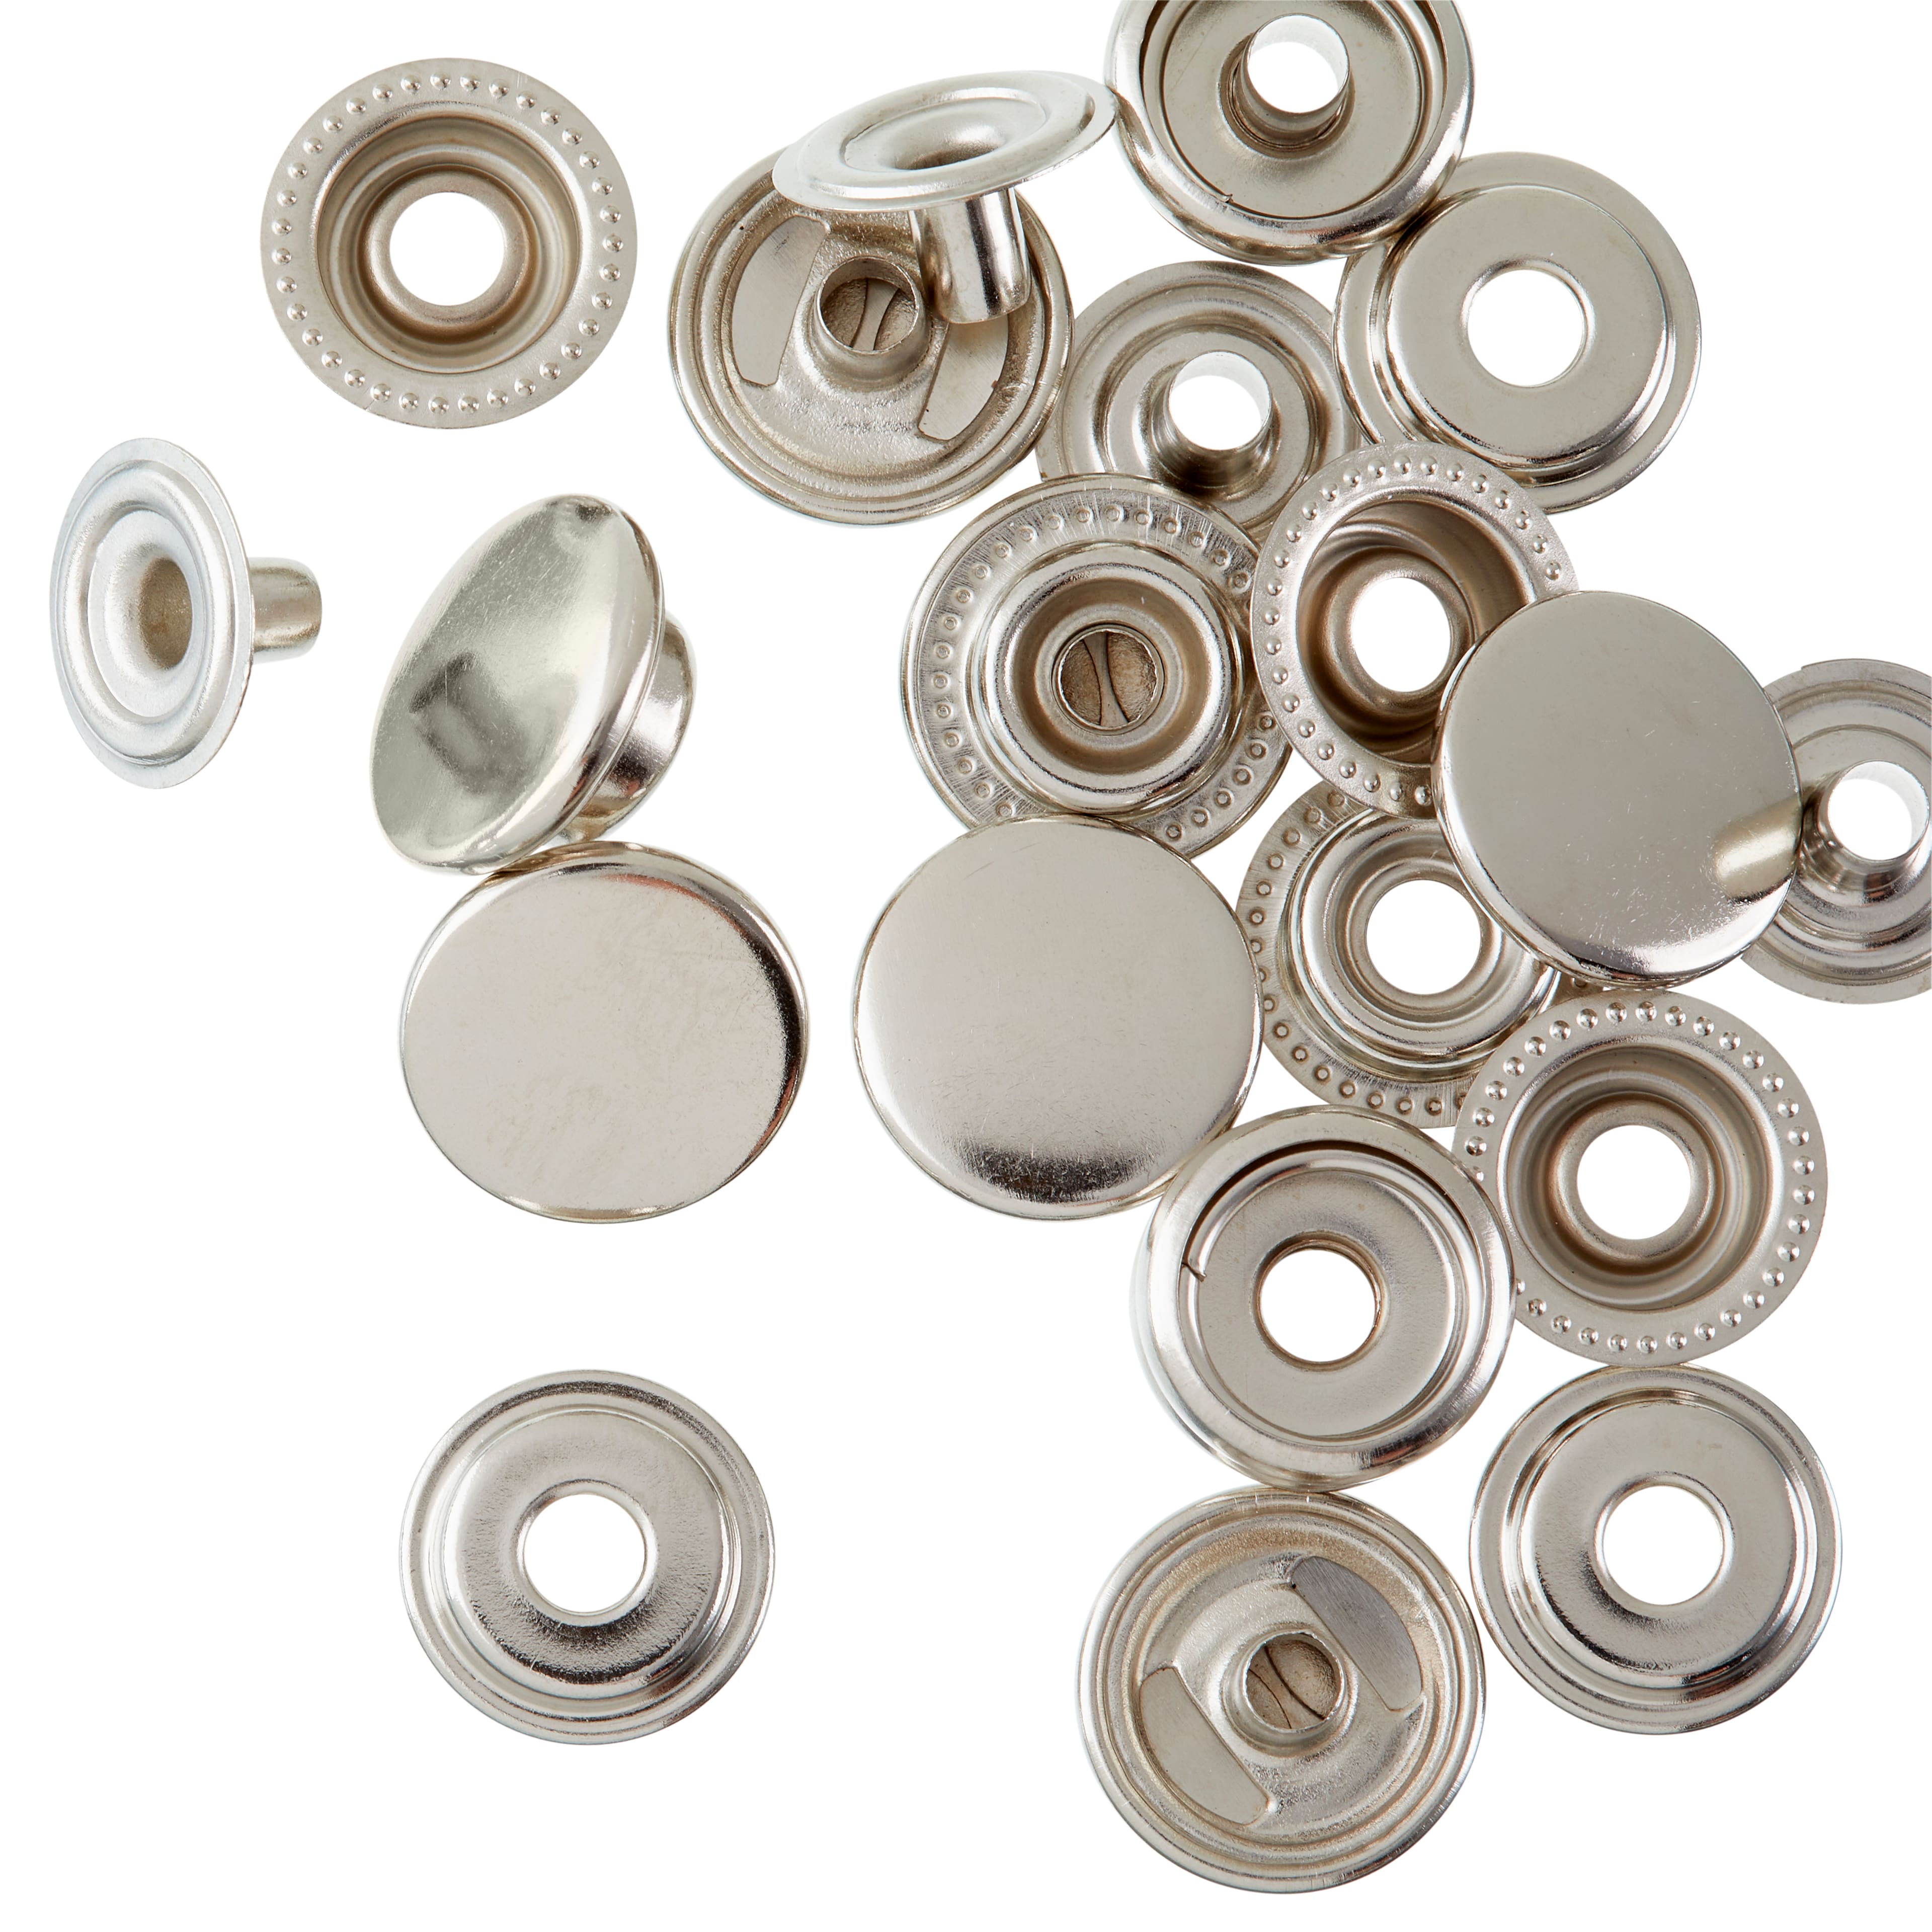 Bargain Deals On Wholesale plastic sew on snap fasteners For DIY Crafts And  Sewing 